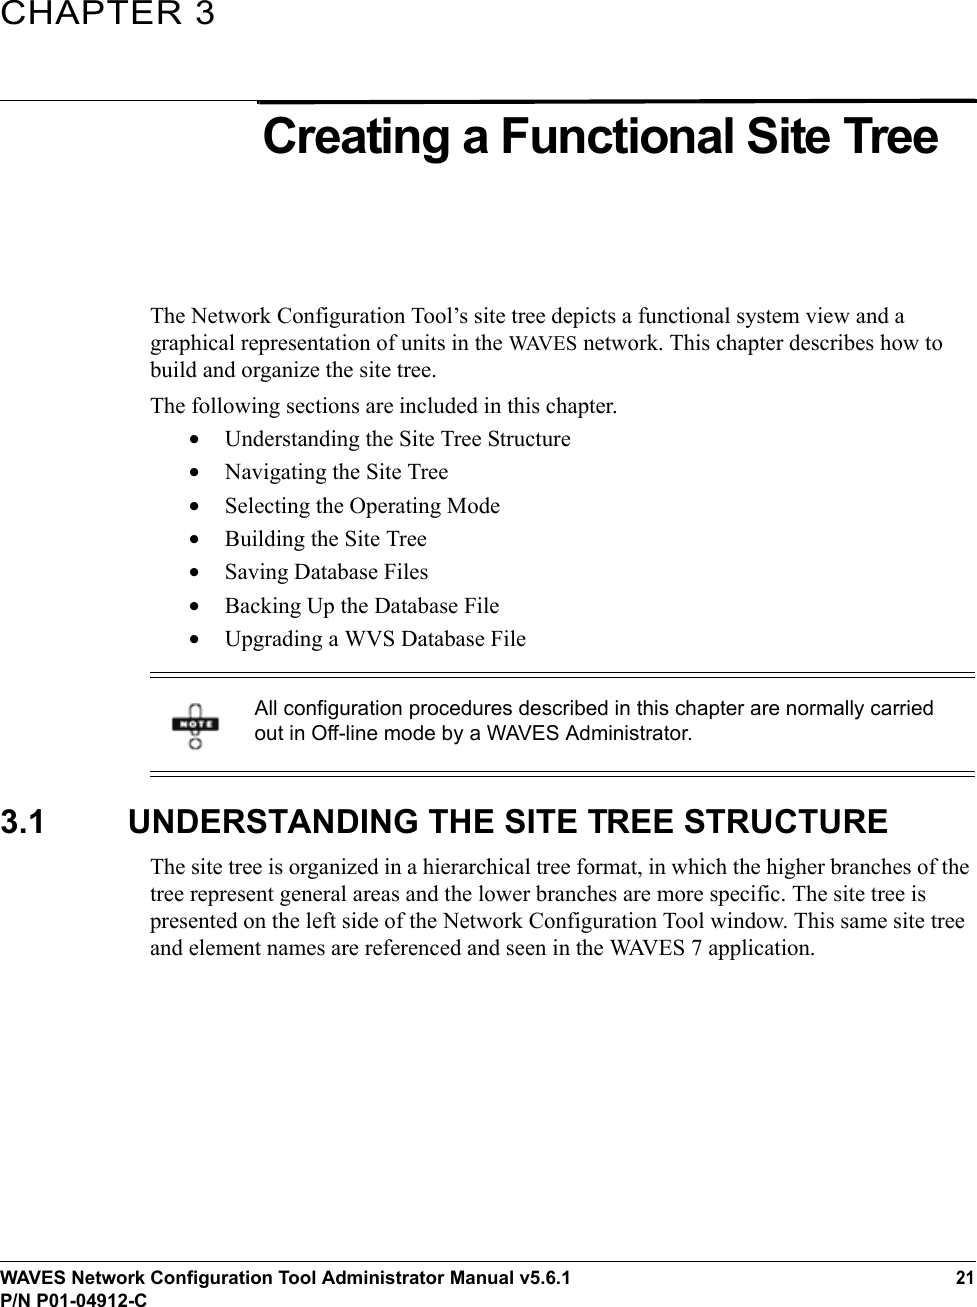 WAVES Network Configuration Tool Administrator Manual v5.6.121P/N P01-04912-CCHAPTER 3Creating a Functional Site TreeThe Network Configuration Tool’s site tree depicts a functional system view and a graphical representation of units in the WAVE S network. This chapter describes how to build and organize the site tree. The following sections are included in this chapter.•Understanding the Site Tree Structure •Navigating the Site Tree•Selecting the Operating Mode•Building the Site Tree•Saving Database Files•Backing Up the Database File•Upgrading a WVS Database File3.1 UNDERSTANDING THE SITE TREE STRUCTUREThe site tree is organized in a hierarchical tree format, in which the higher branches of the tree represent general areas and the lower branches are more specific. The site tree is presented on the left side of the Network Configuration Tool window. This same site tree and element names are referenced and seen in the WAVES 7 application.All configuration procedures described in this chapter are normally carried out in Off-line mode by a WAVES Administrator.